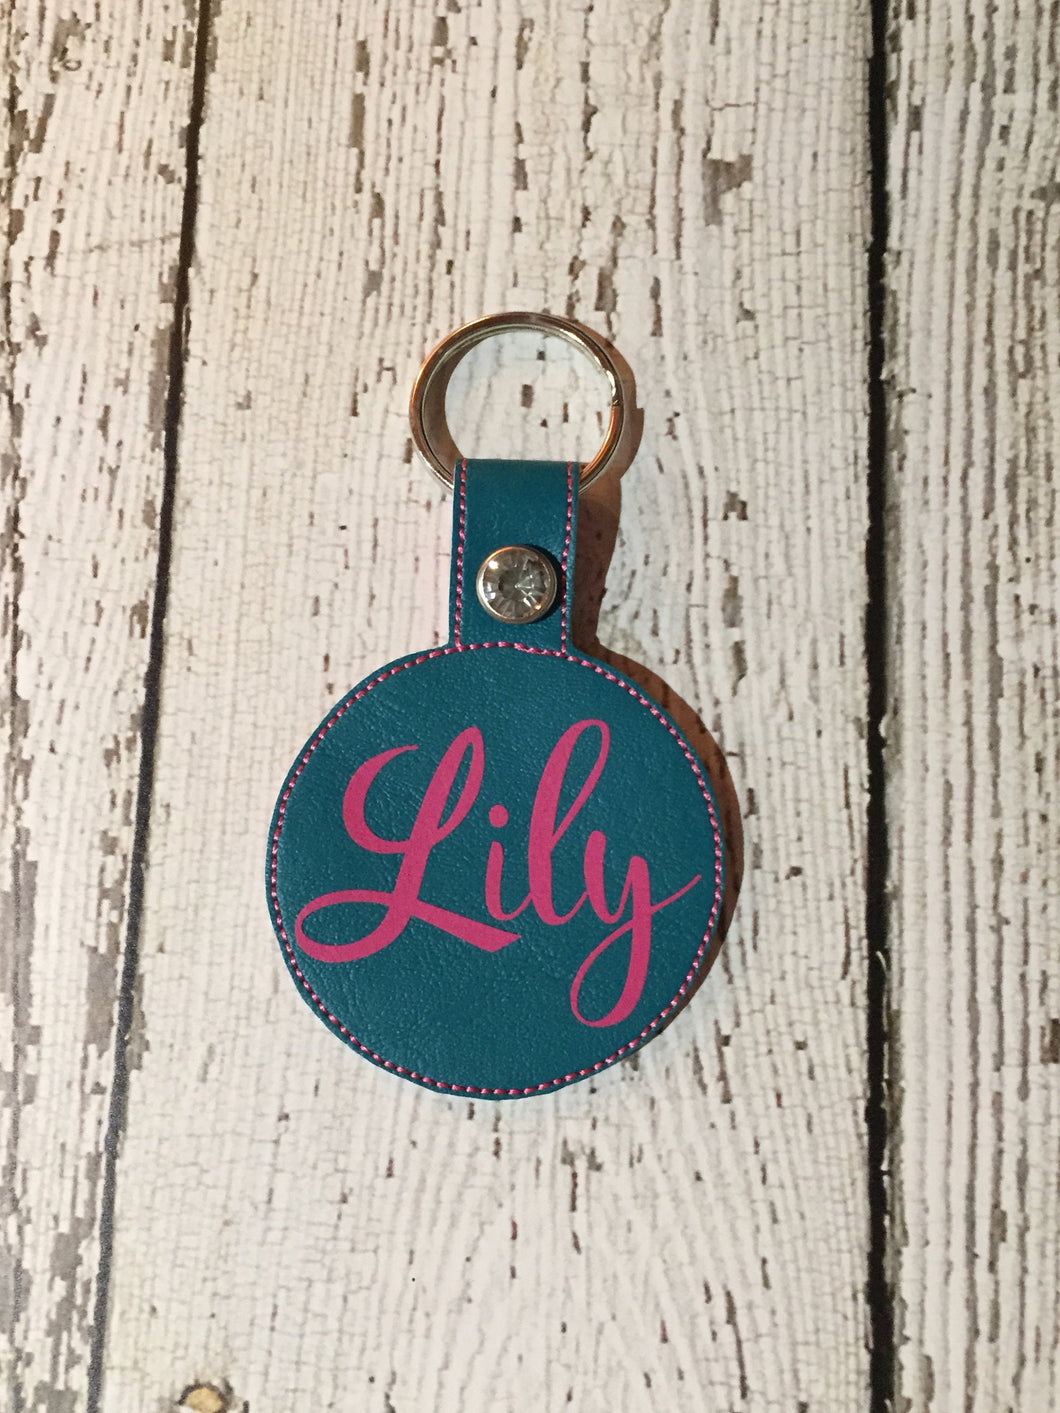 Personalized Name Keychain Gift, Name Keychain Gift Personalized, Keychain Gift Personalized Name, Personalized Gift For Her, Birthday Gift